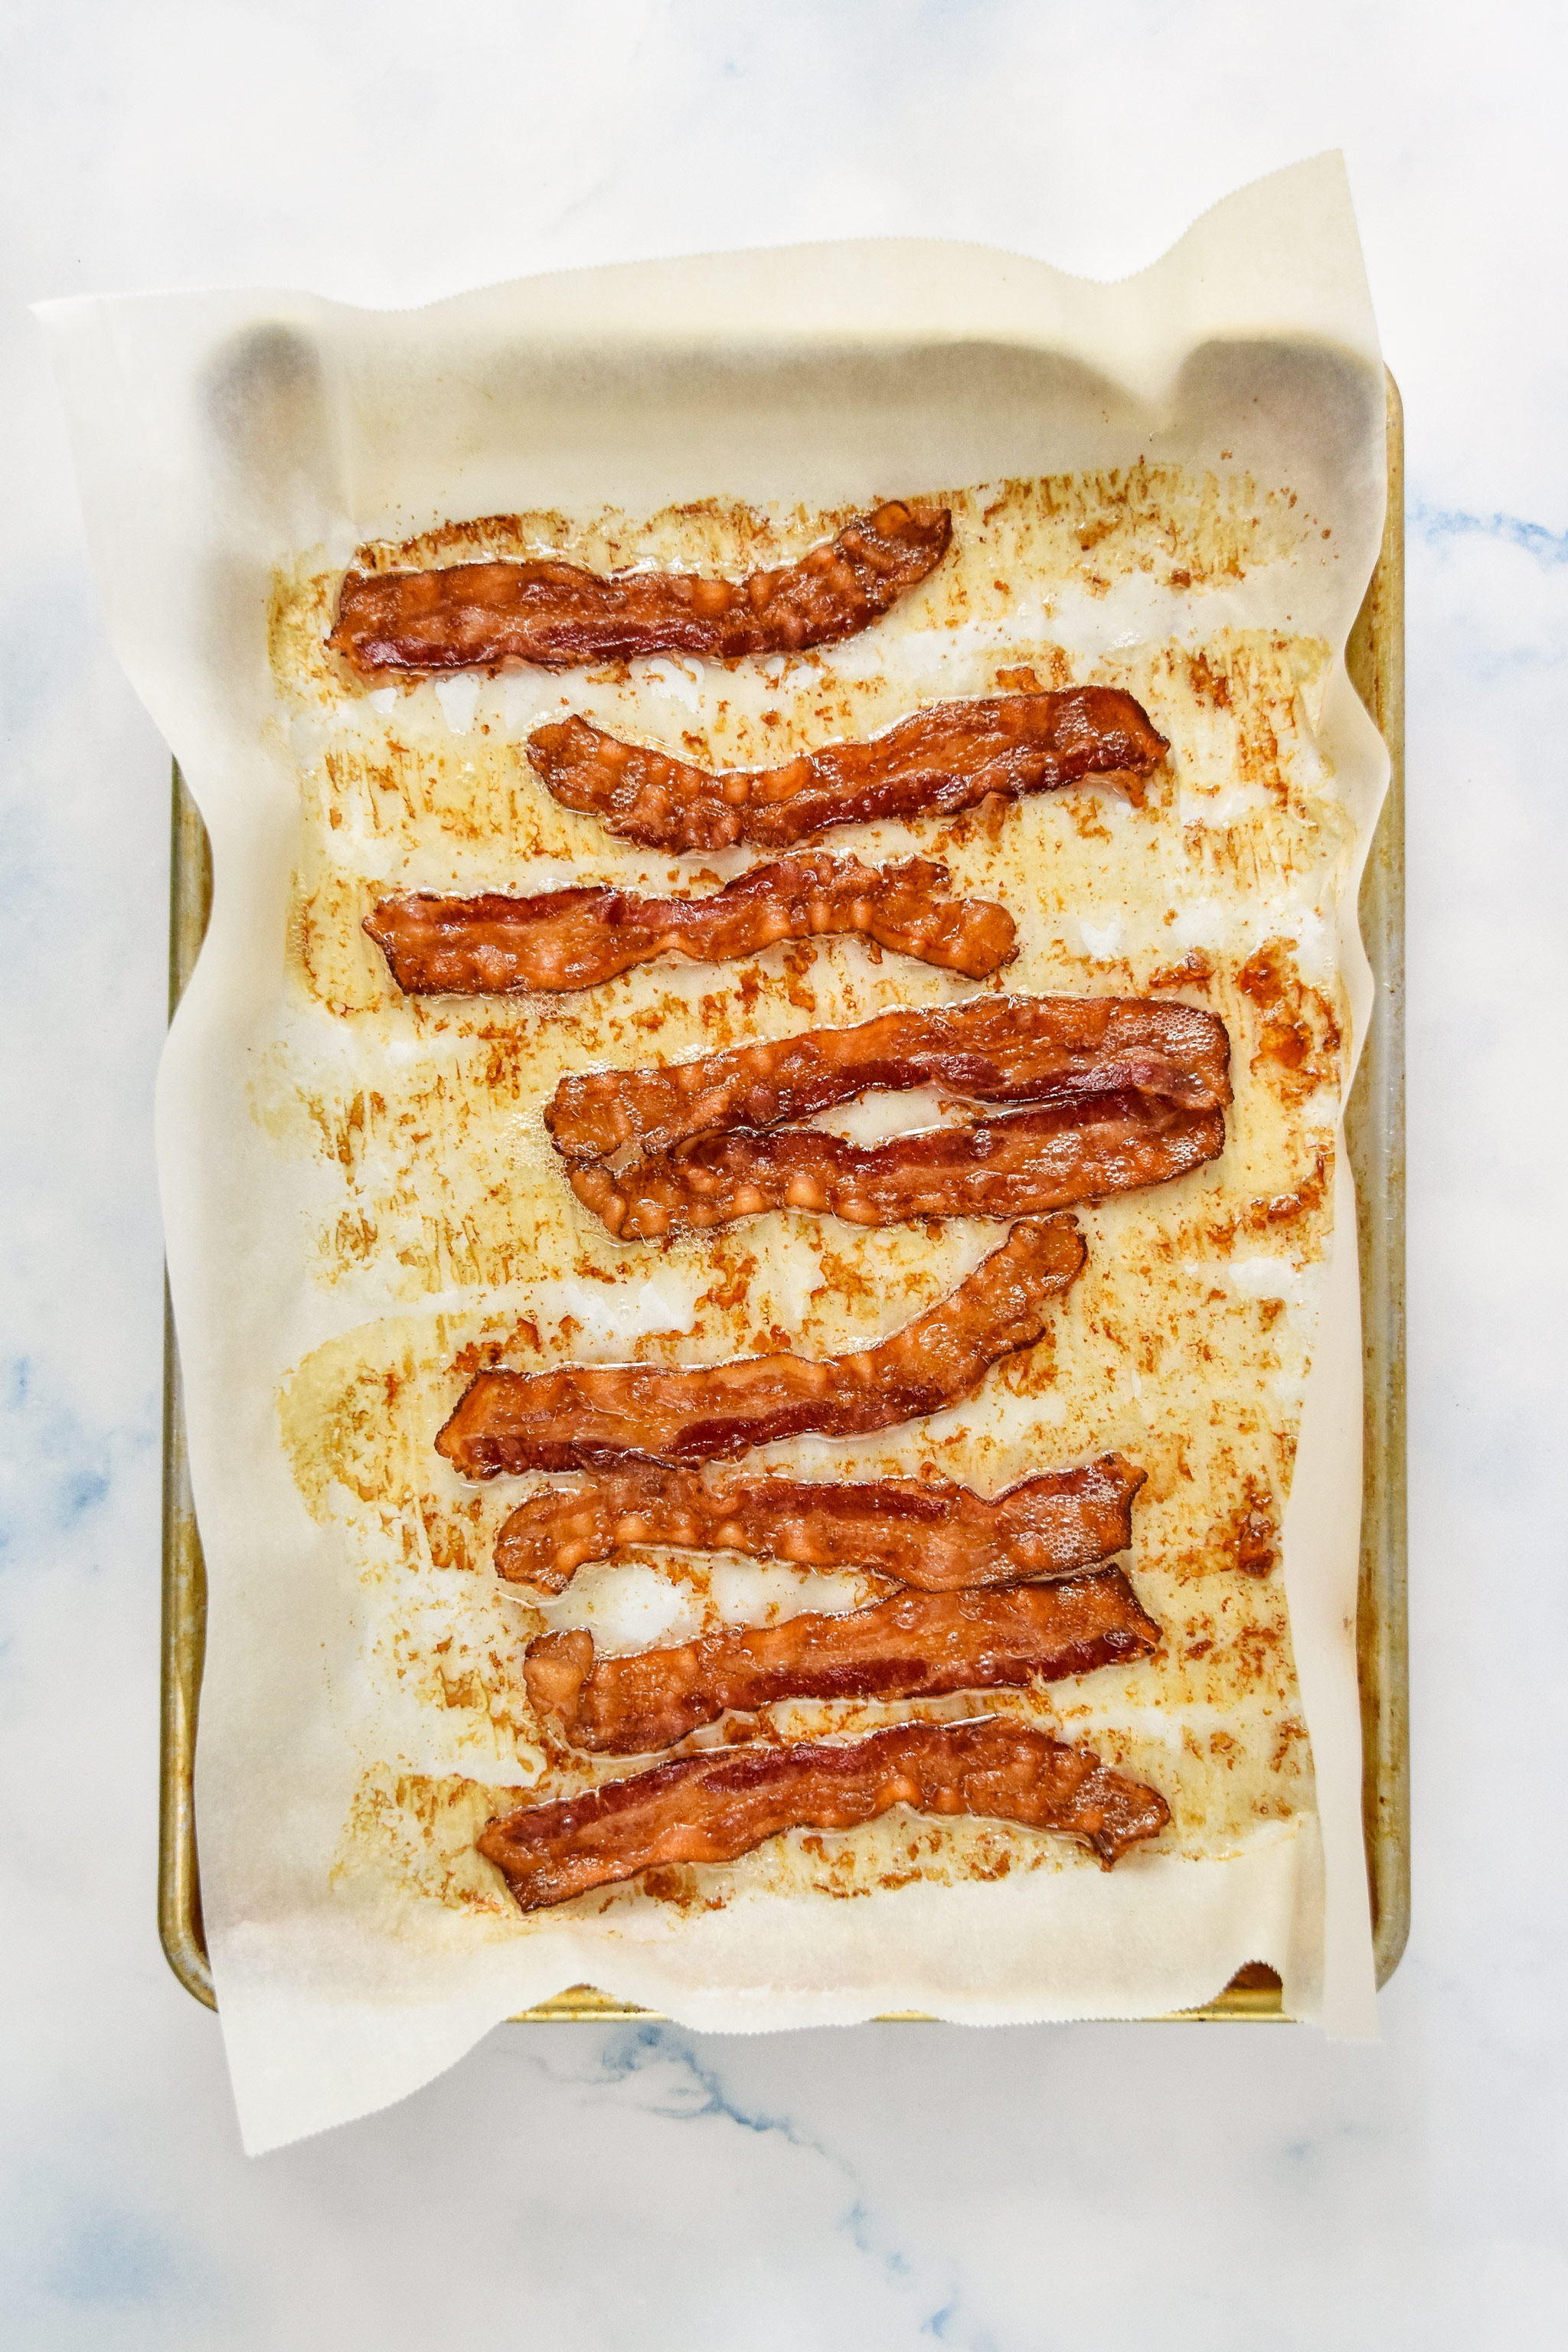 oven baked bacon on parchment paper.